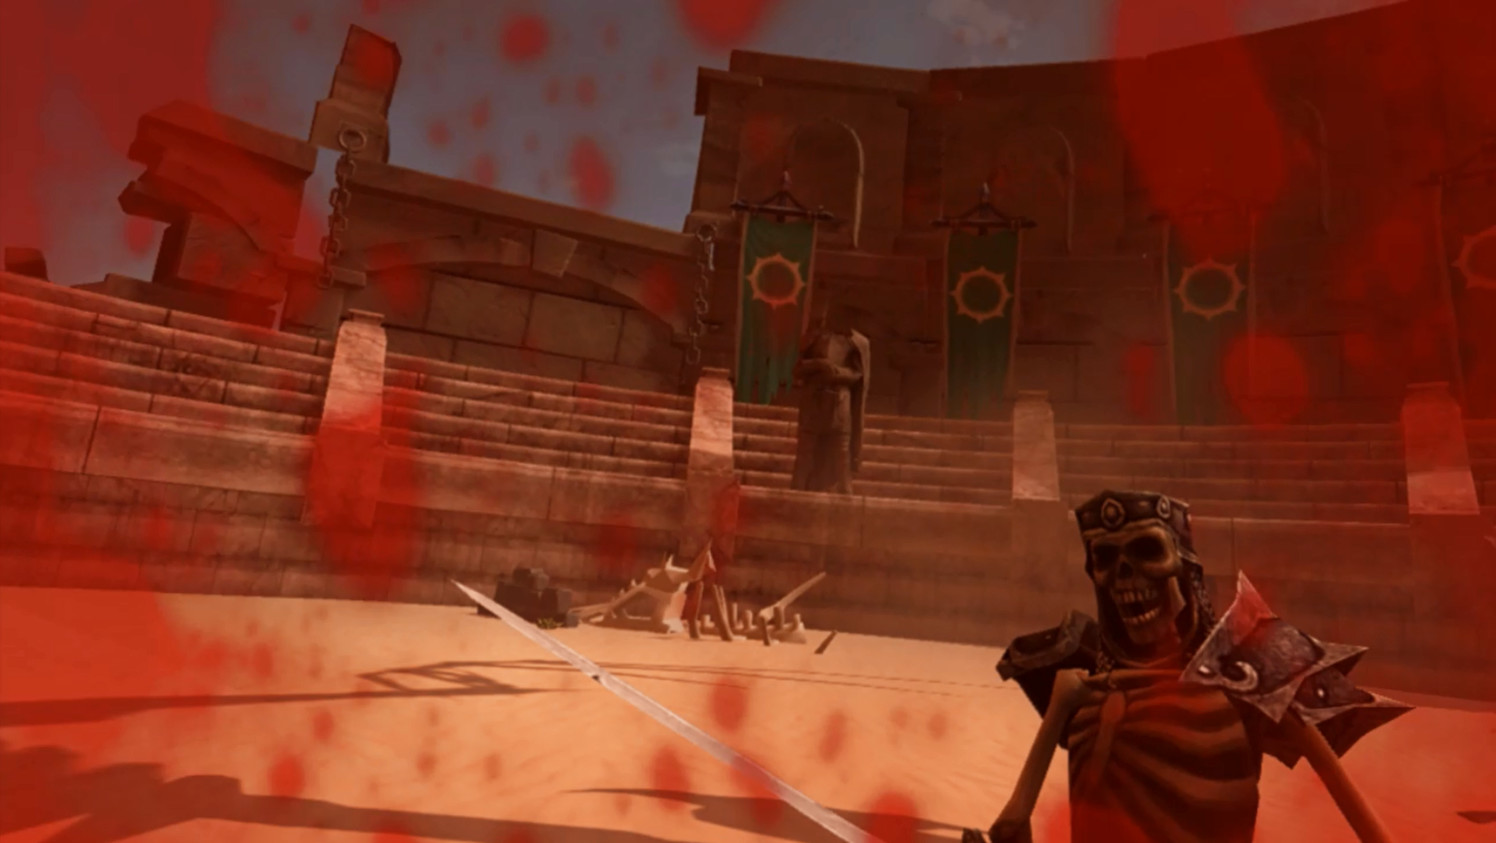 Arena: Blood on the Sand VR Steam CD Key 5.12 $